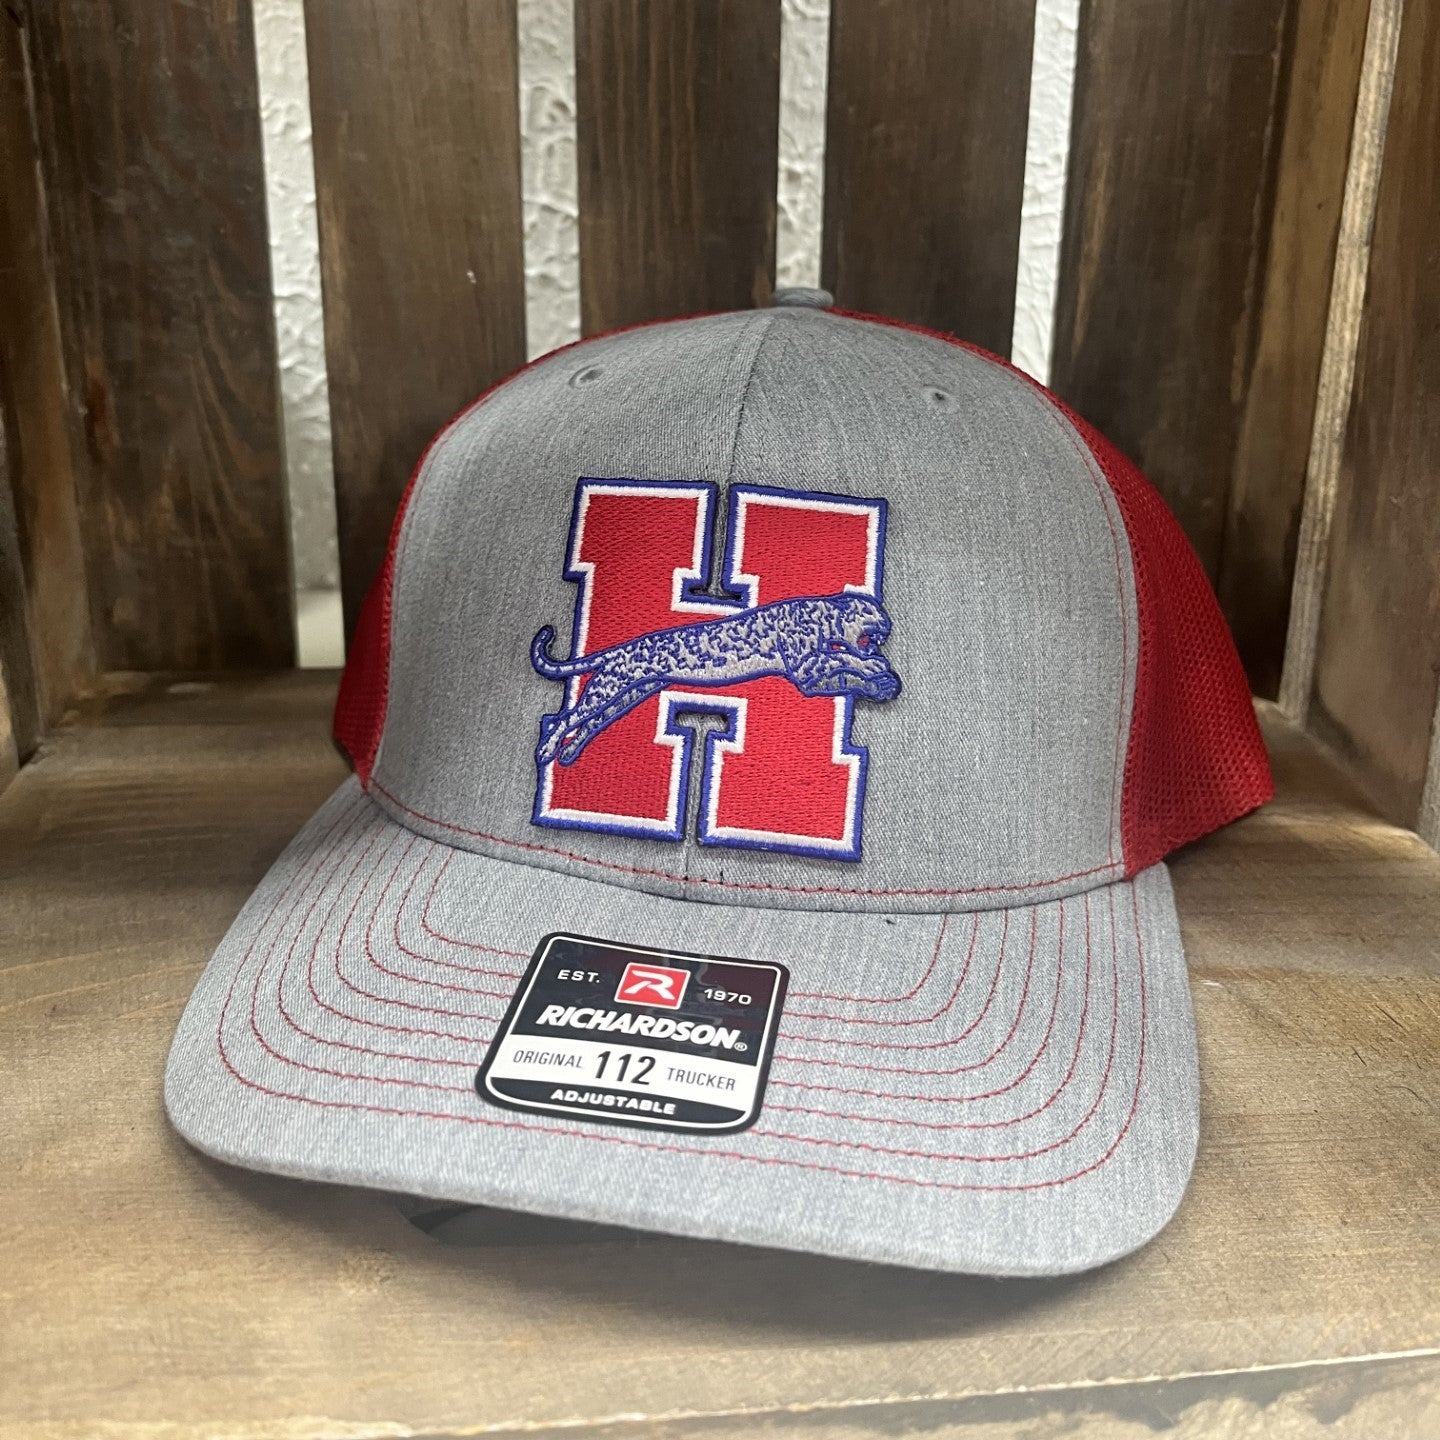 Heritage Grey/Red Mesh PATCH hat